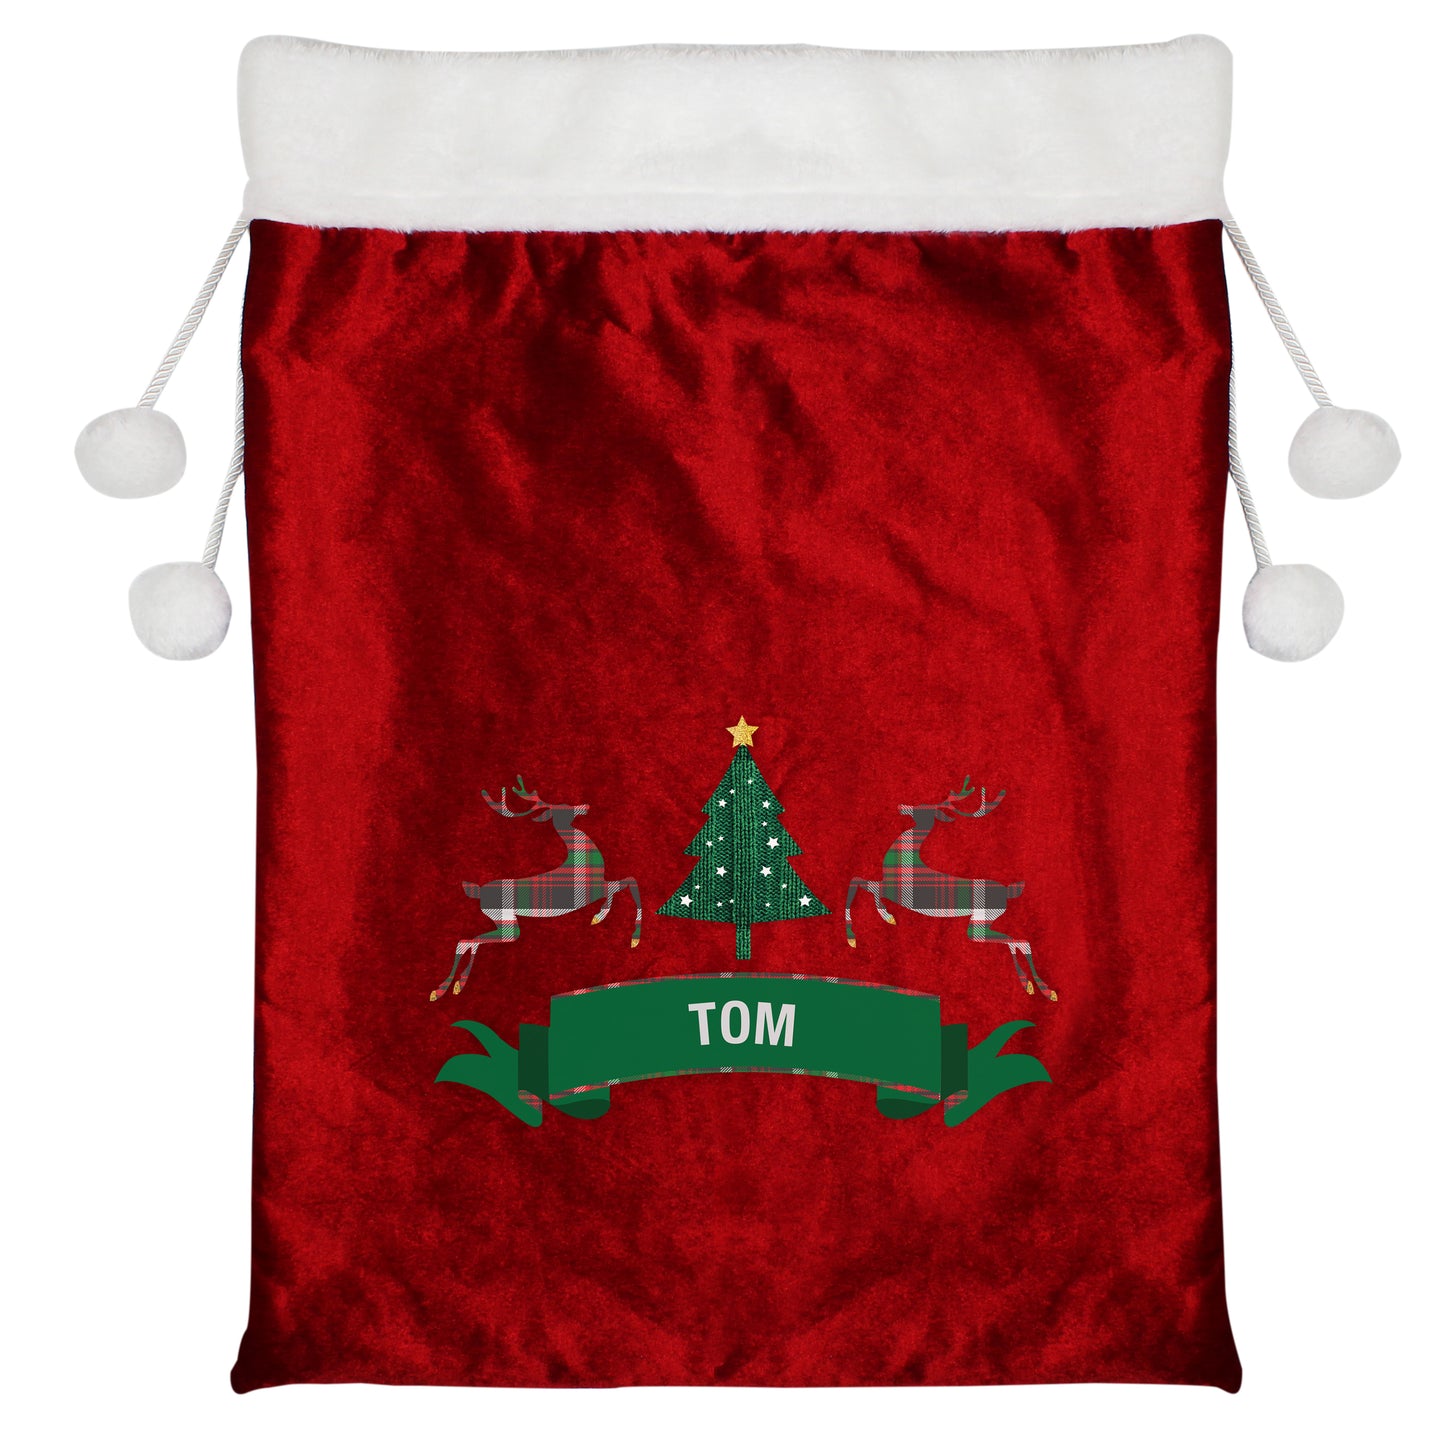 Personalised Nordic Christmas Luxury Pom Pom Red Sack - Personalise It!